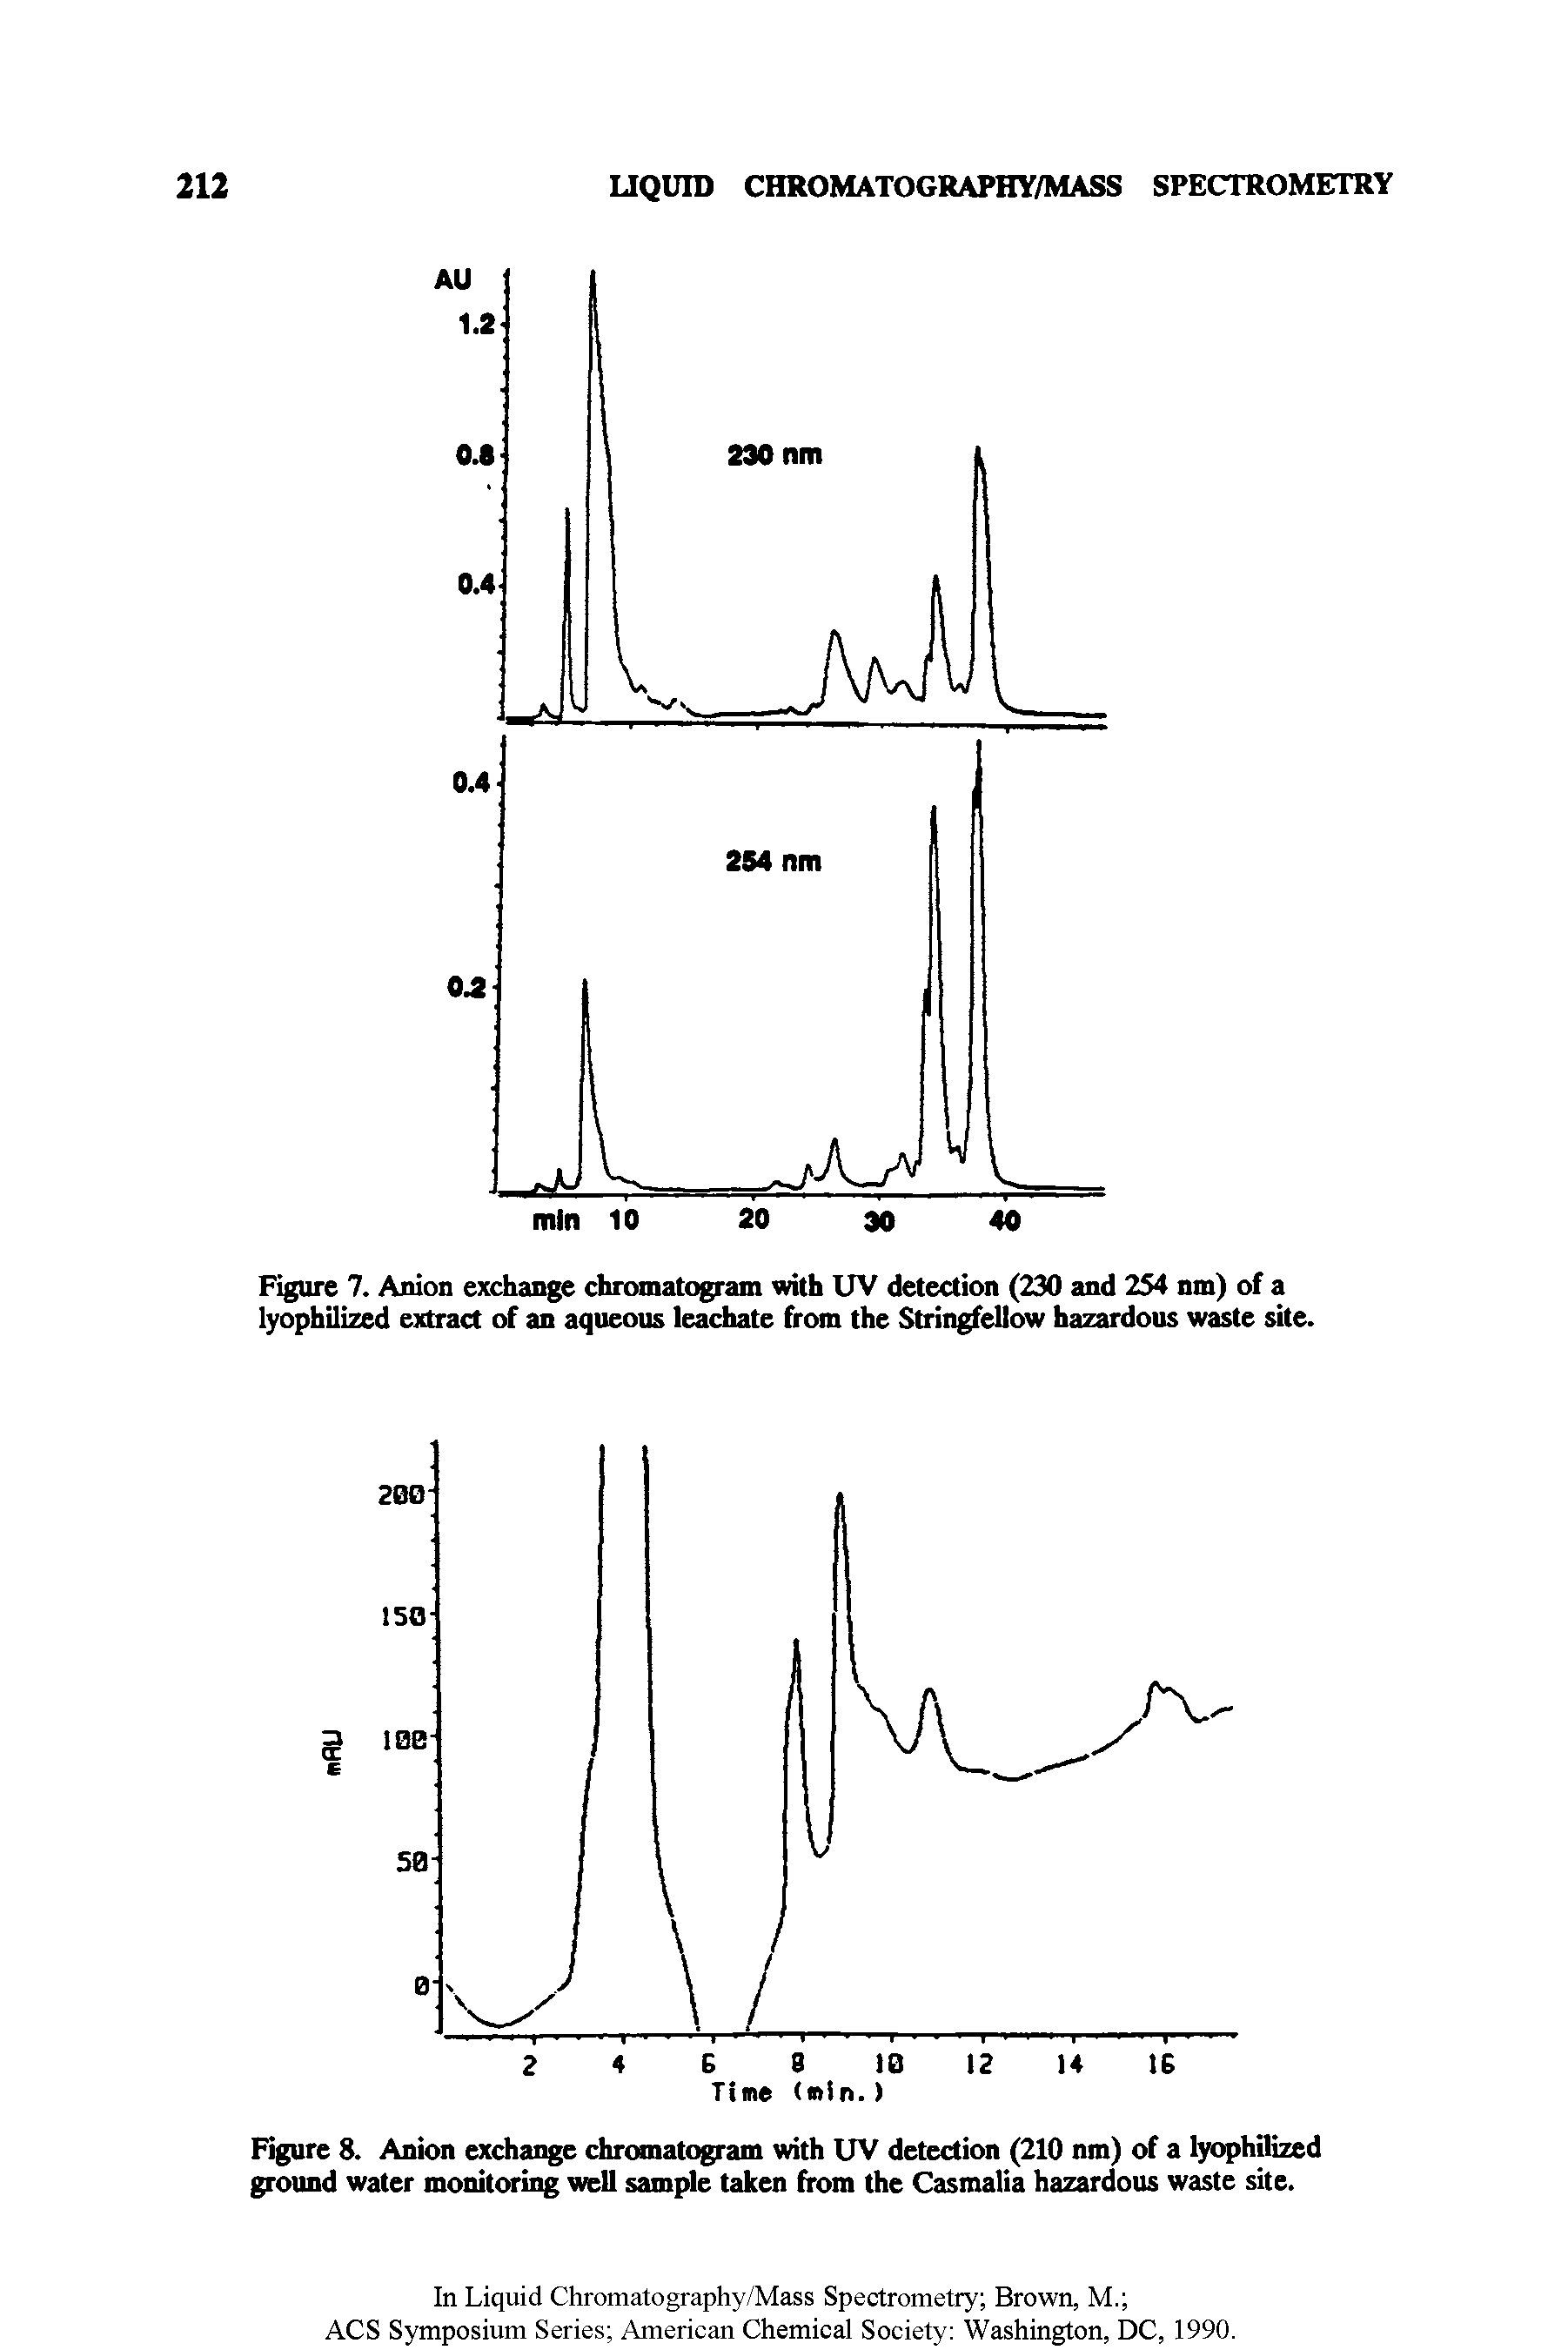 Figure 7. Anion exchange chromatogram with UV detection (230 and 254 nm) of a lyophilized extract of an aqueous leachate from the Stringfellow hazardous waste site.